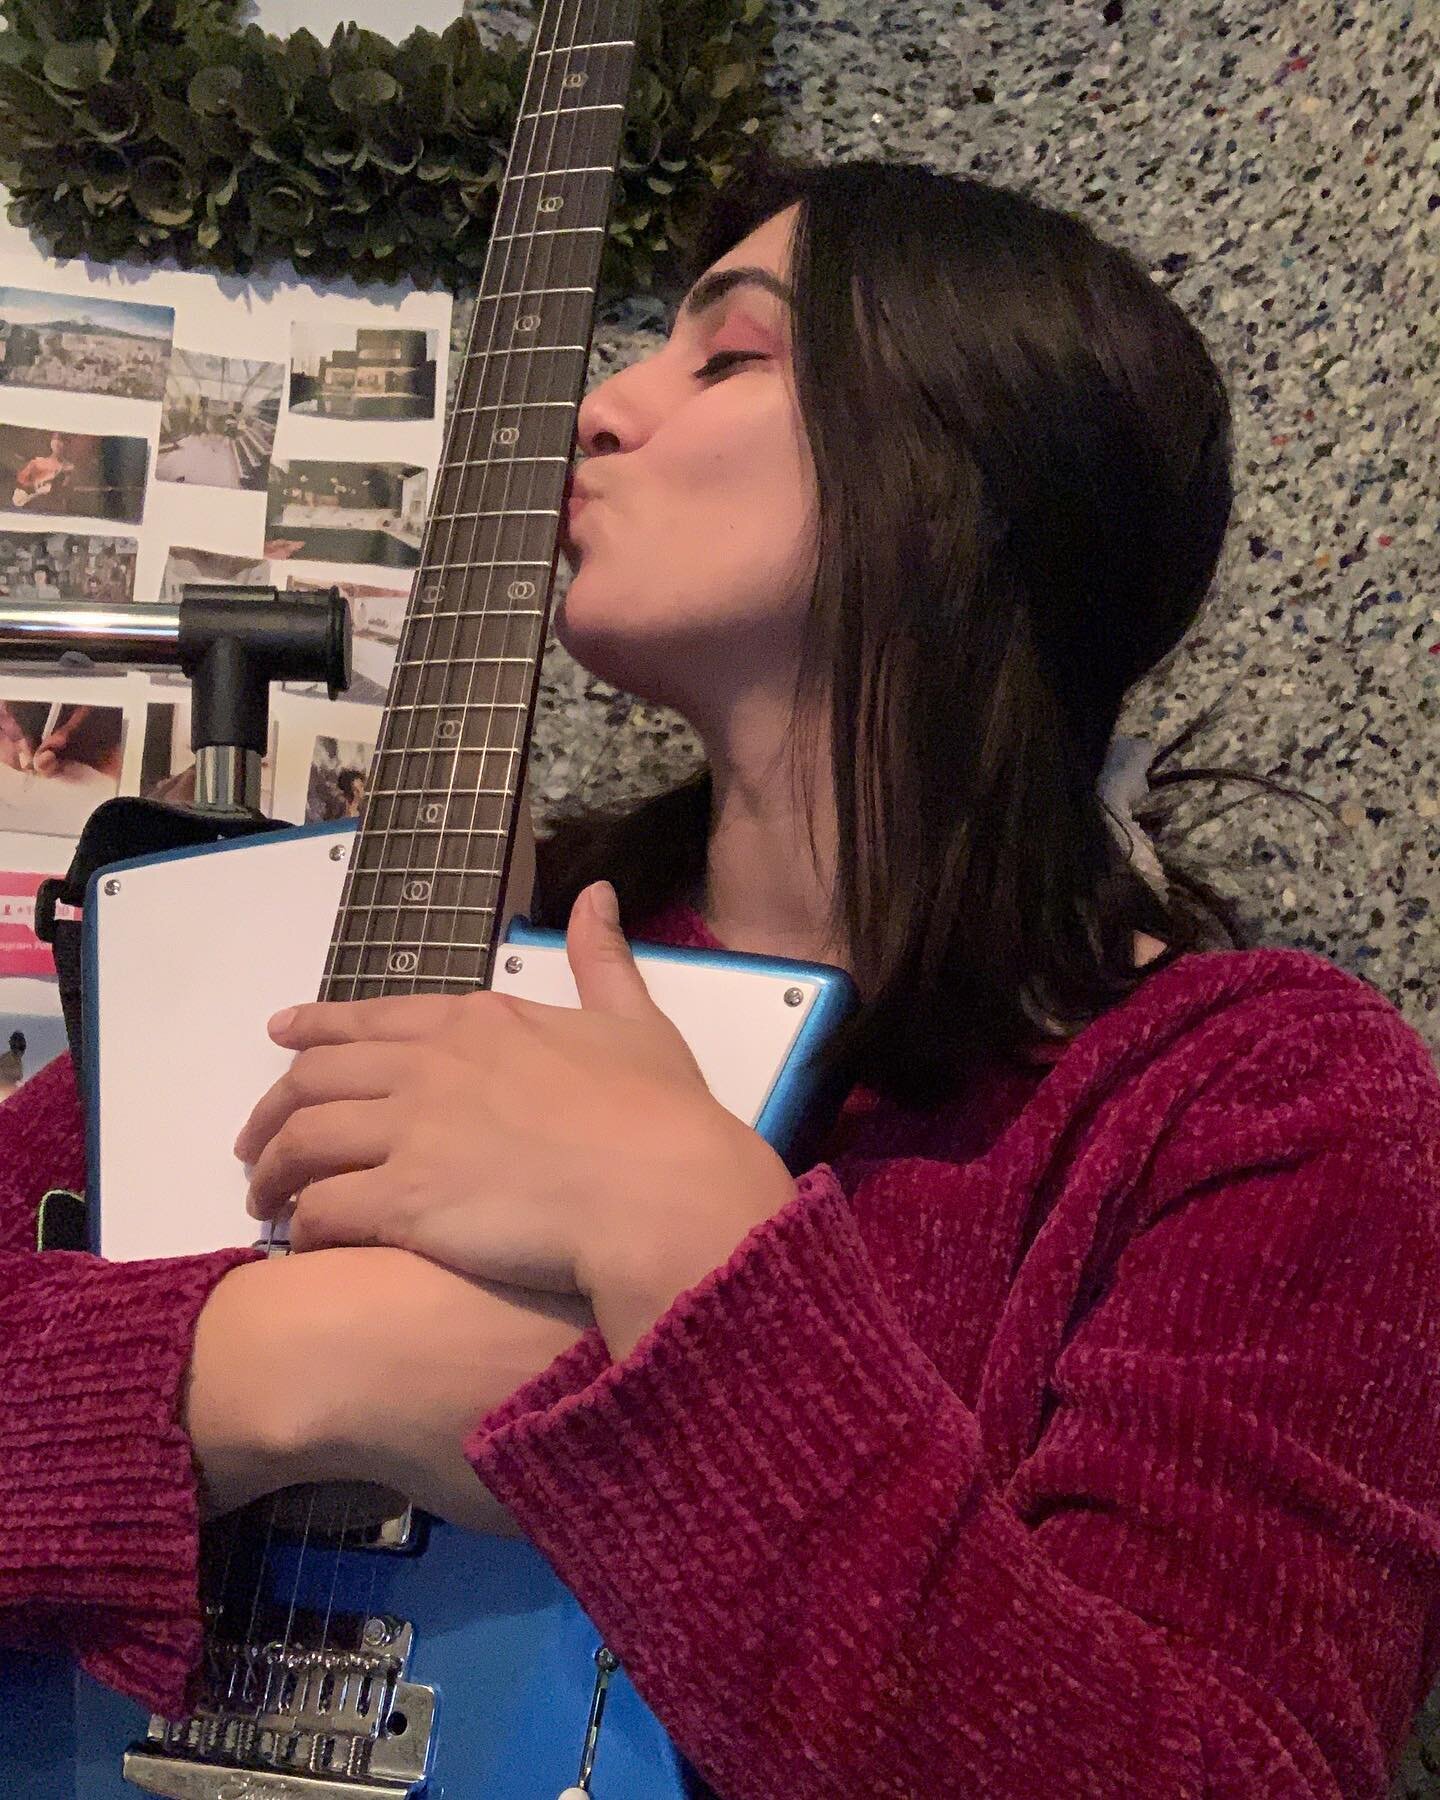 WE DID IT PEOPLE! Day 31 of #1RAD aka the end to this lovely challenge. I decided to write something today from scratch - this challenge has brought me back to the joy of just playing guitar for fun. I started when I was 7 and would just noodle for h